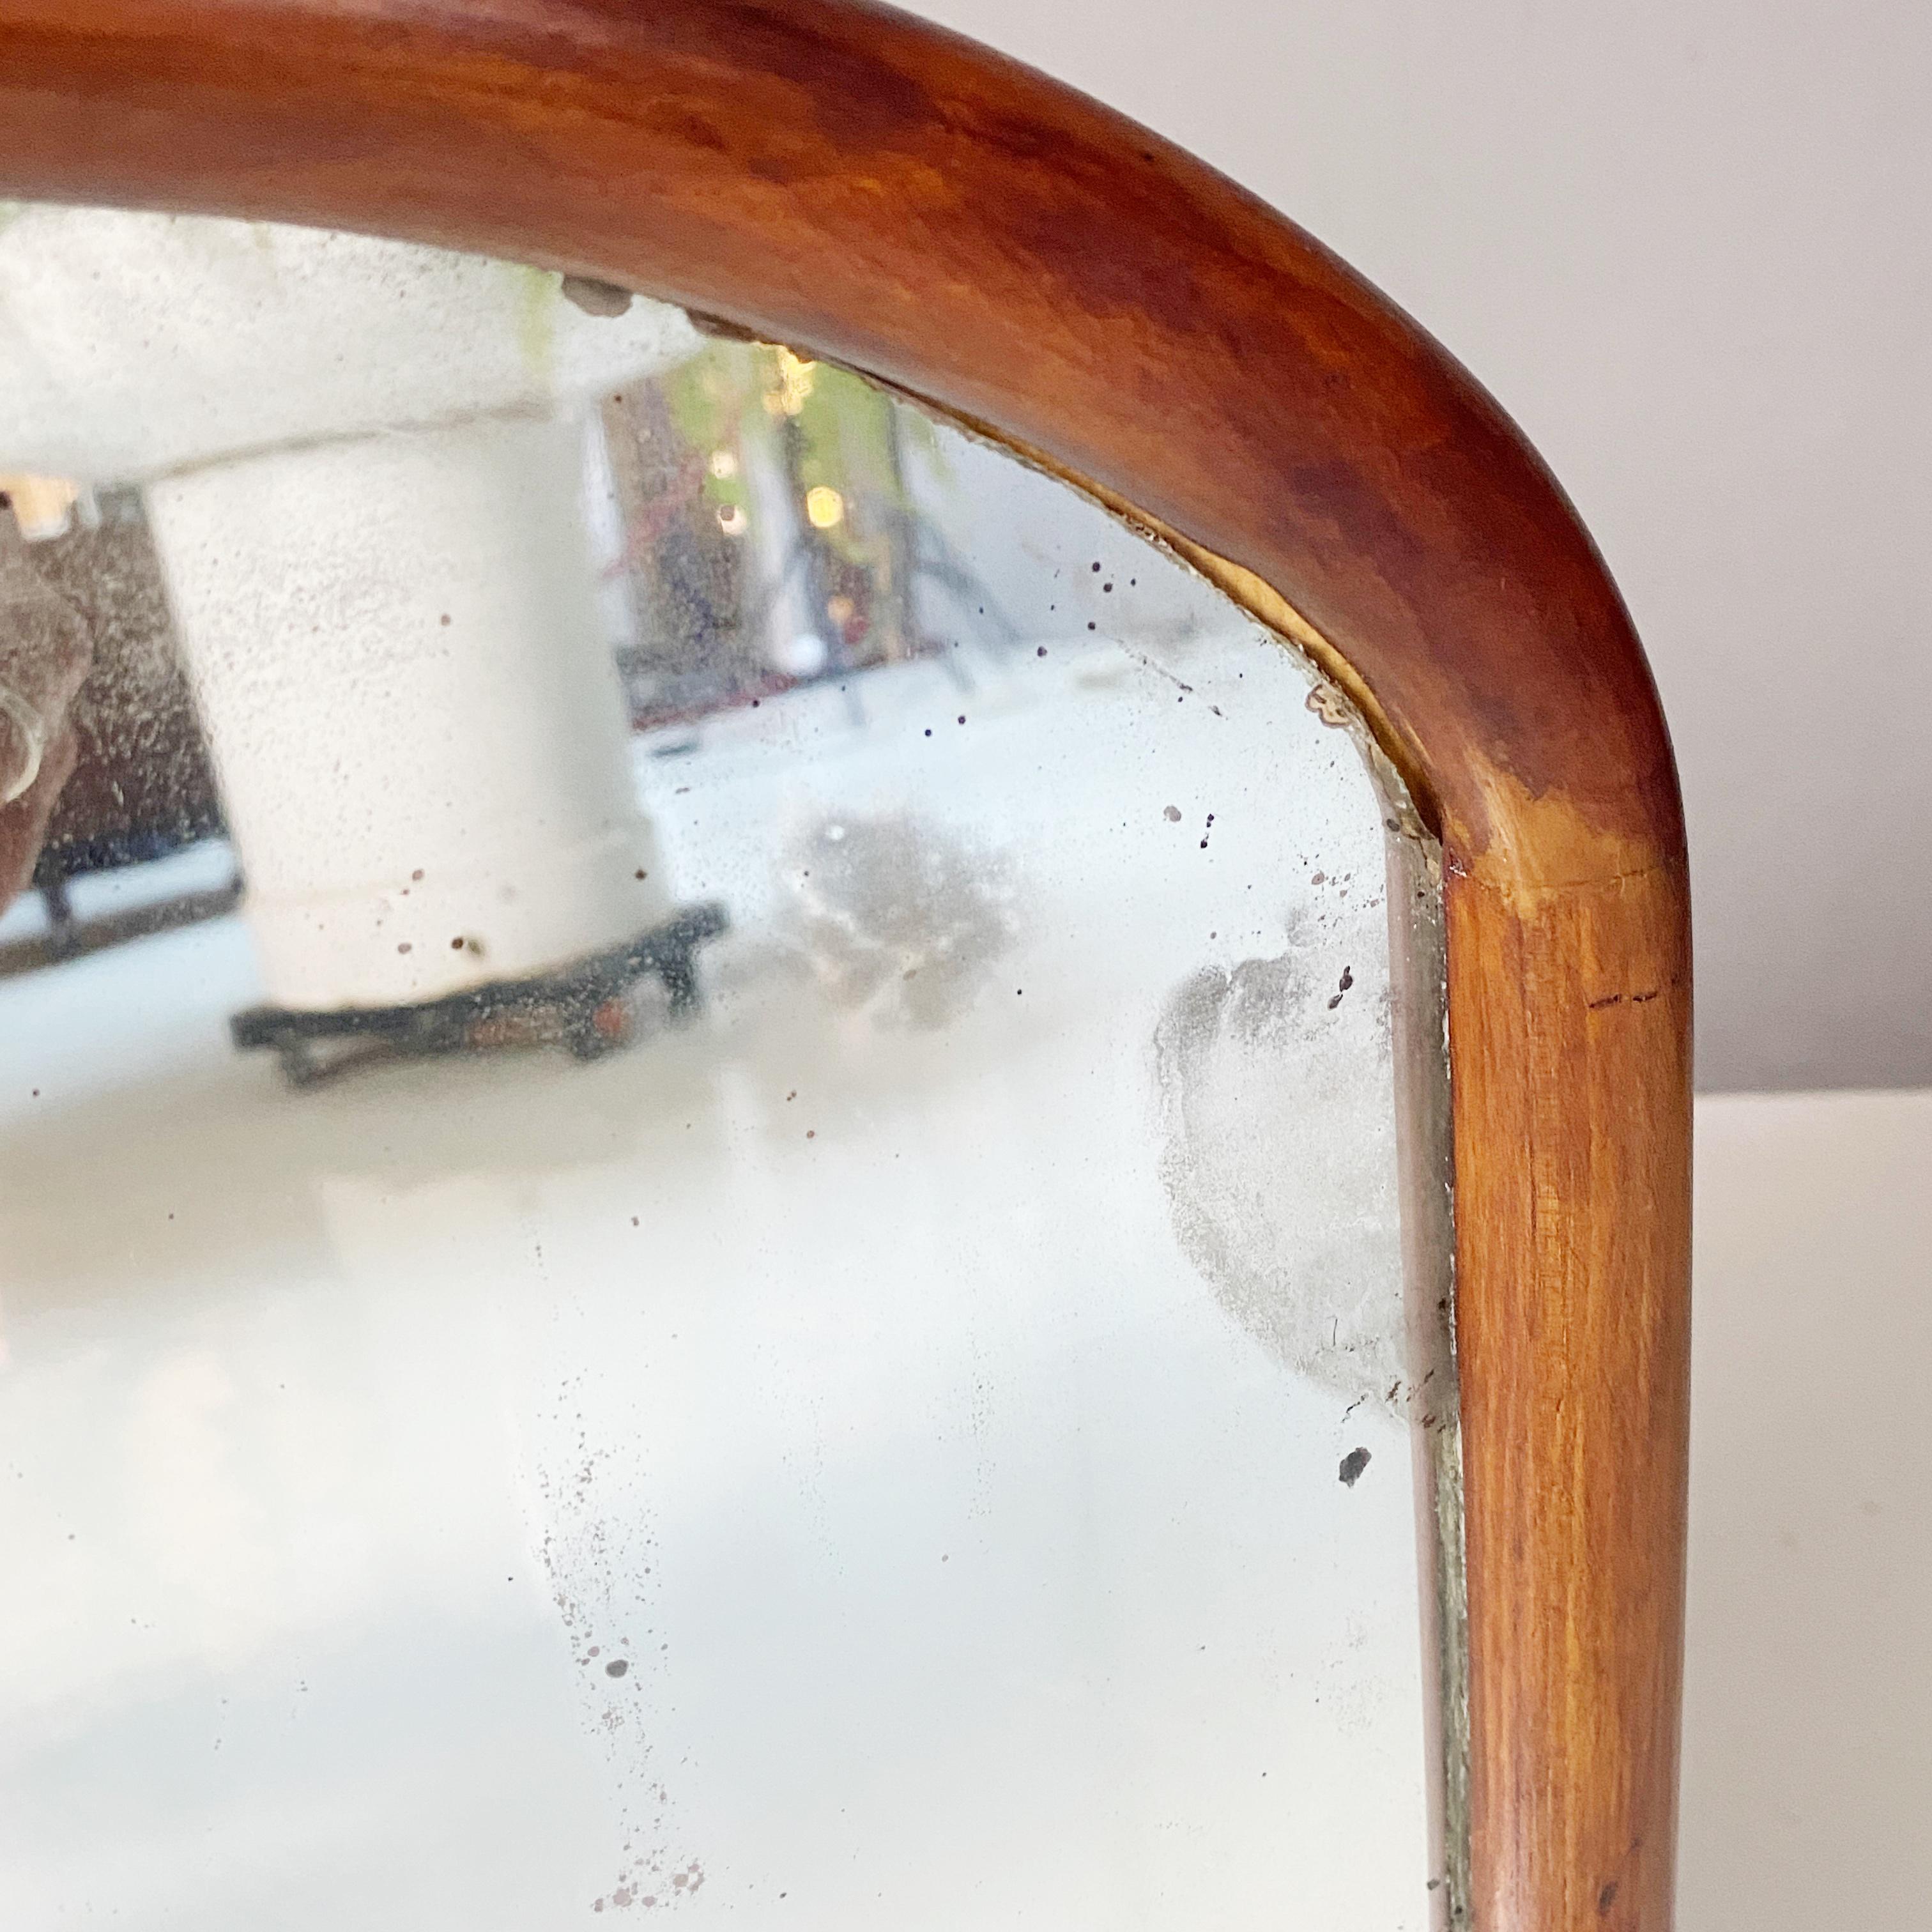 Italian 18th Century Wooden Table Mirror with Mercury Glass, 1700s For Sale 6